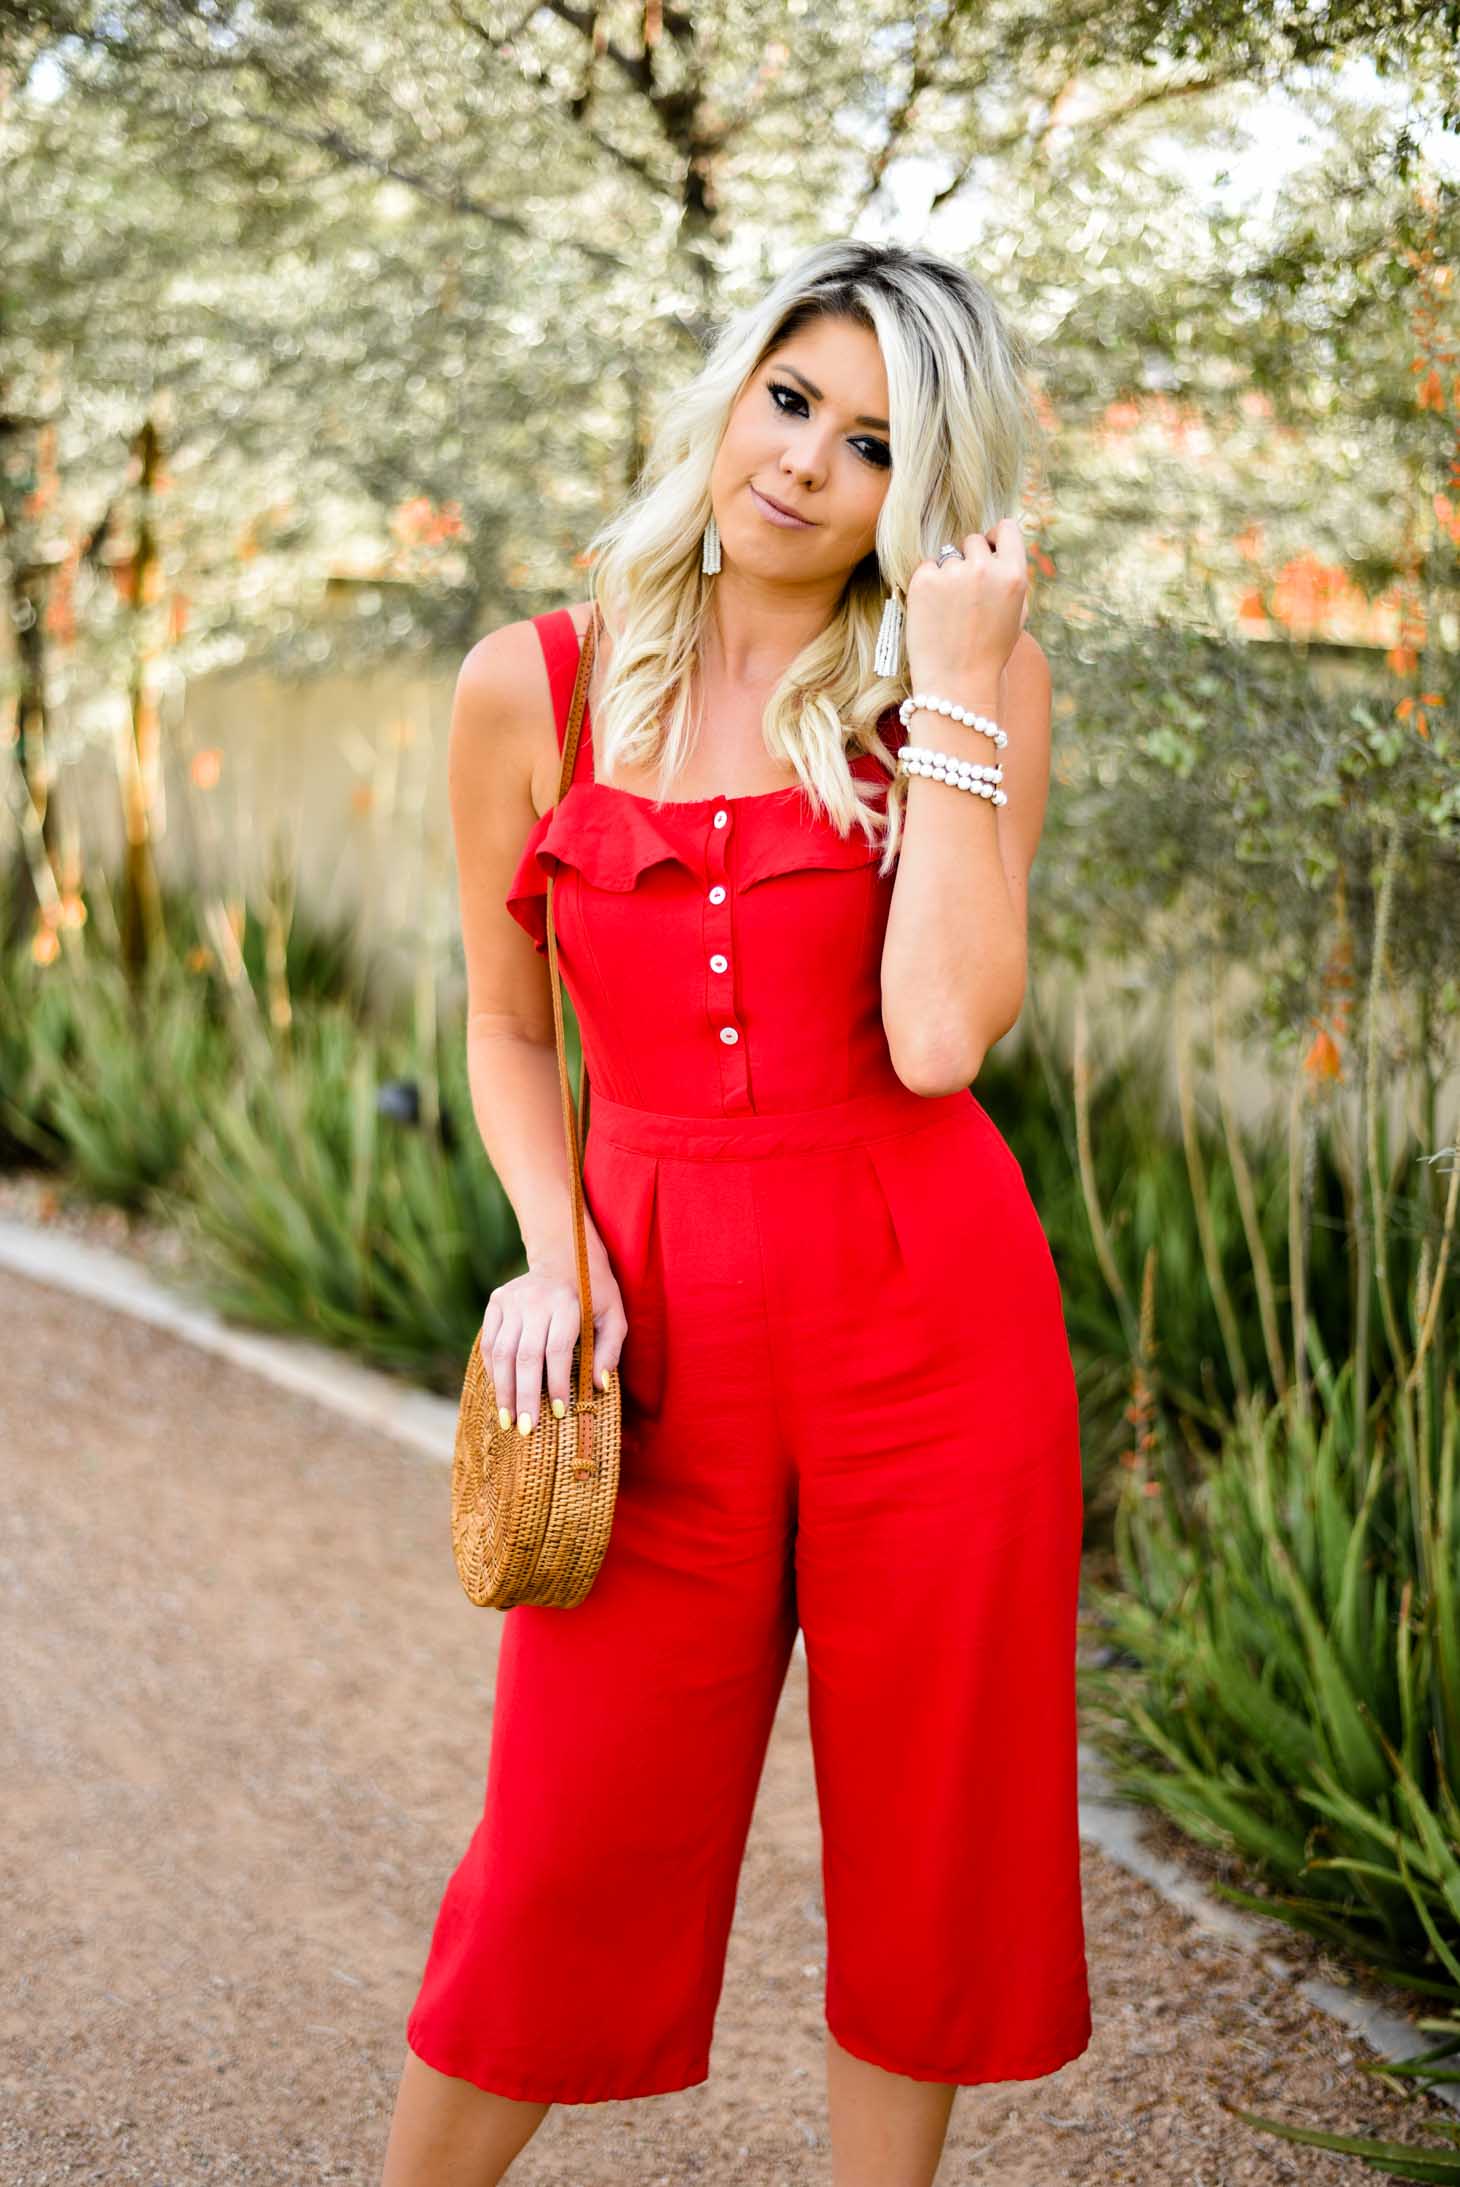 Erin Elizabeth of Wink and a Twirl in Red Jumpsuit Red Dress Boutique